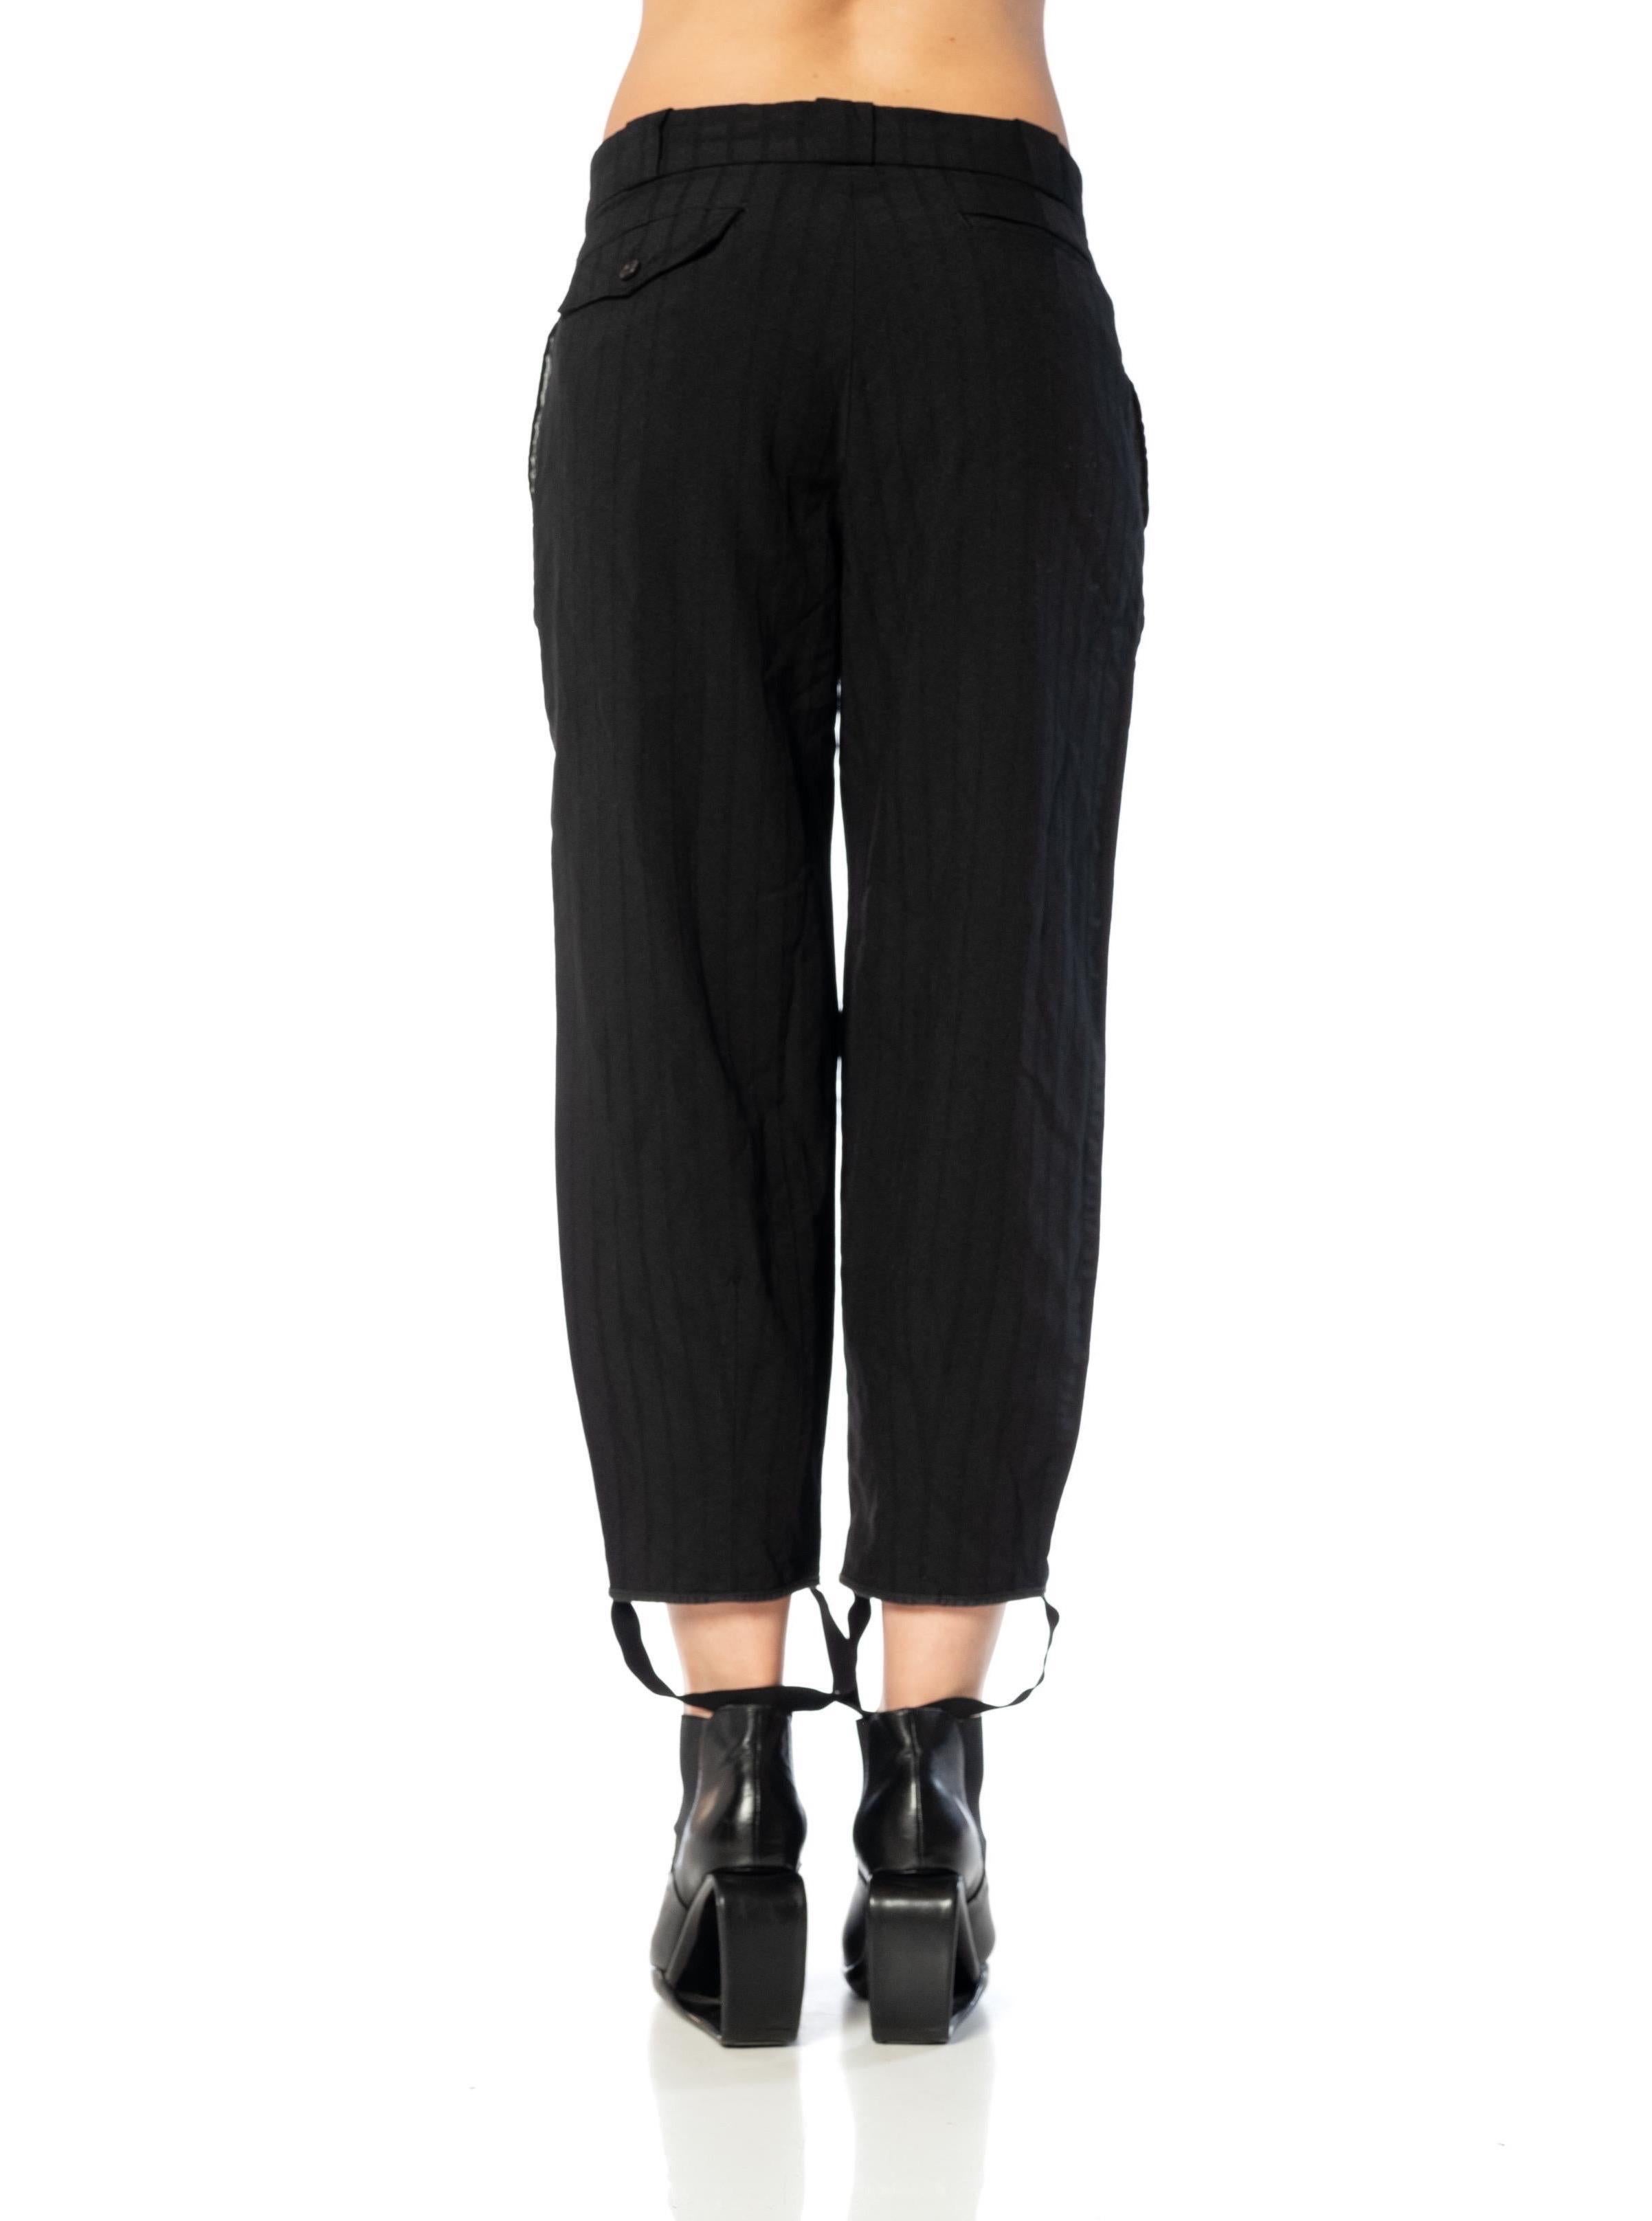 2010S COMME DES GARCONS Black Striped Polyester Crinkle Stripe Pants With Foot  For Sale 2